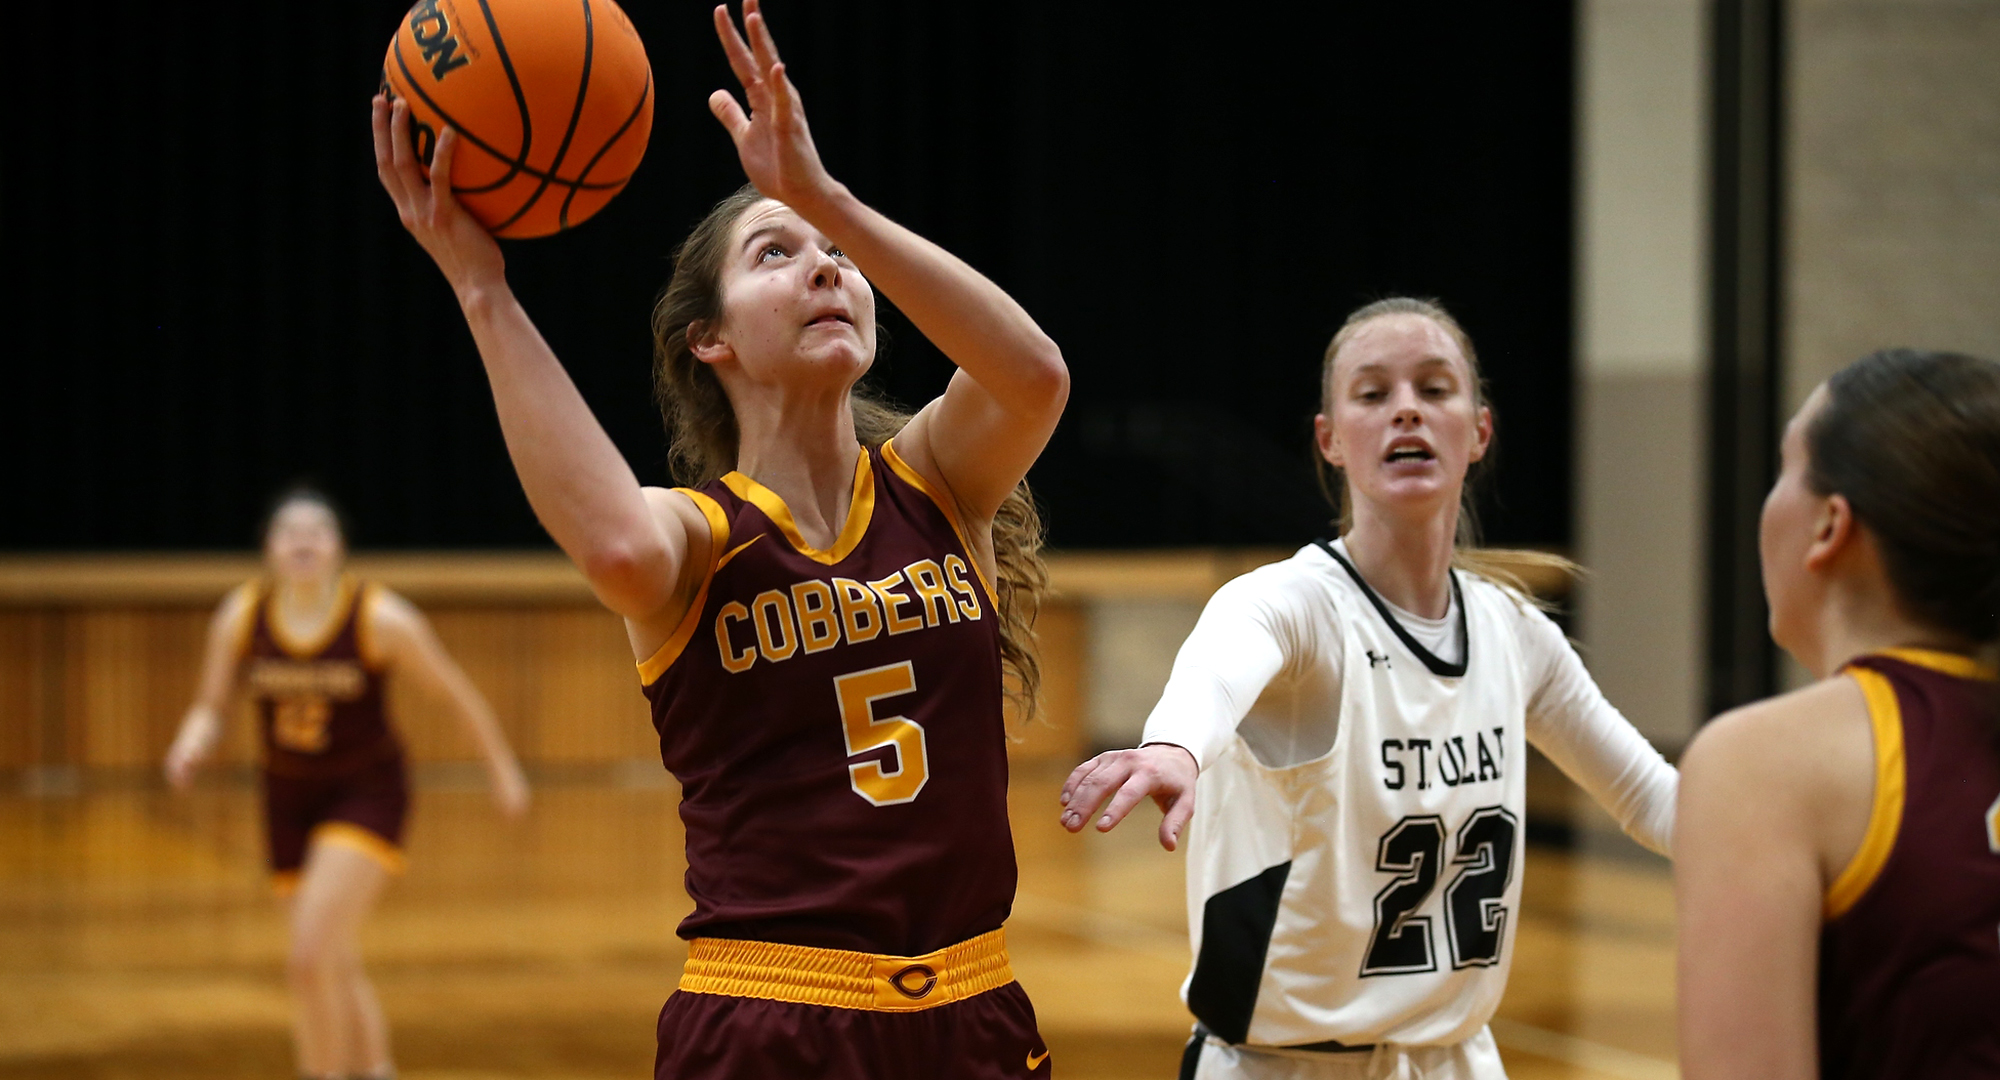 Genevieve Gruba lays in two of her season-high 11 points in the Cobbers' win at St. Olaf. (Photo courtesy of Ryan Coleman, D3photography.com)